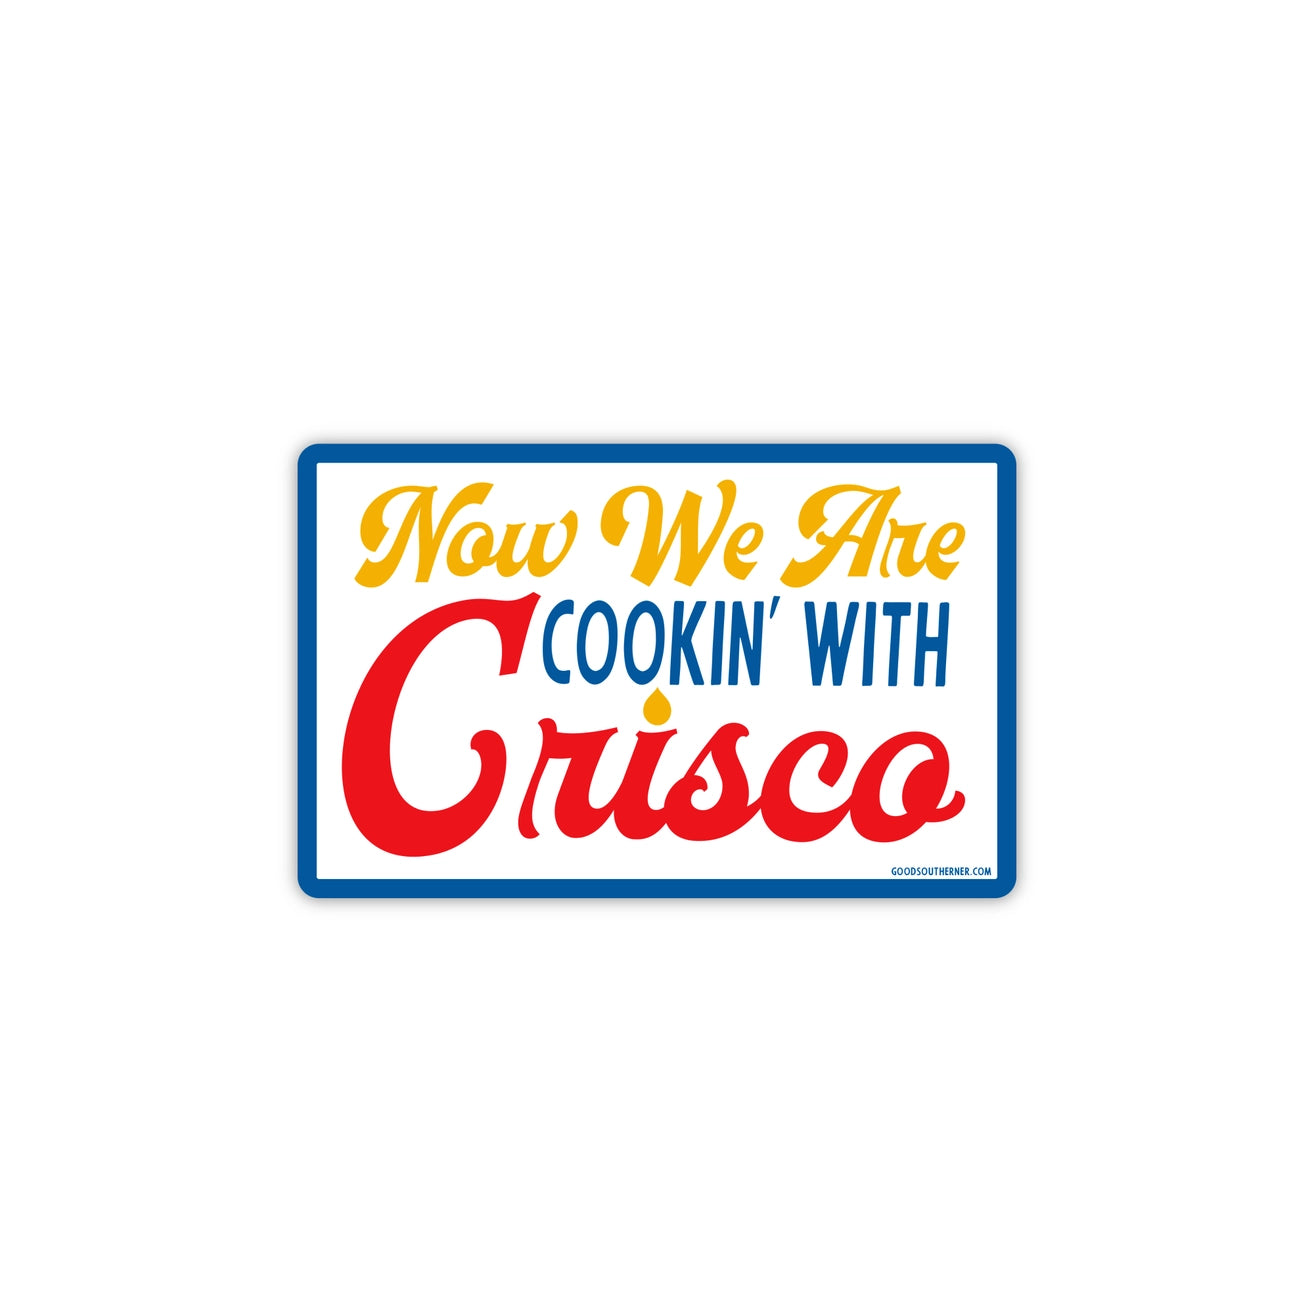 Now We Are Cooking with Crisco Vinyl Sticker